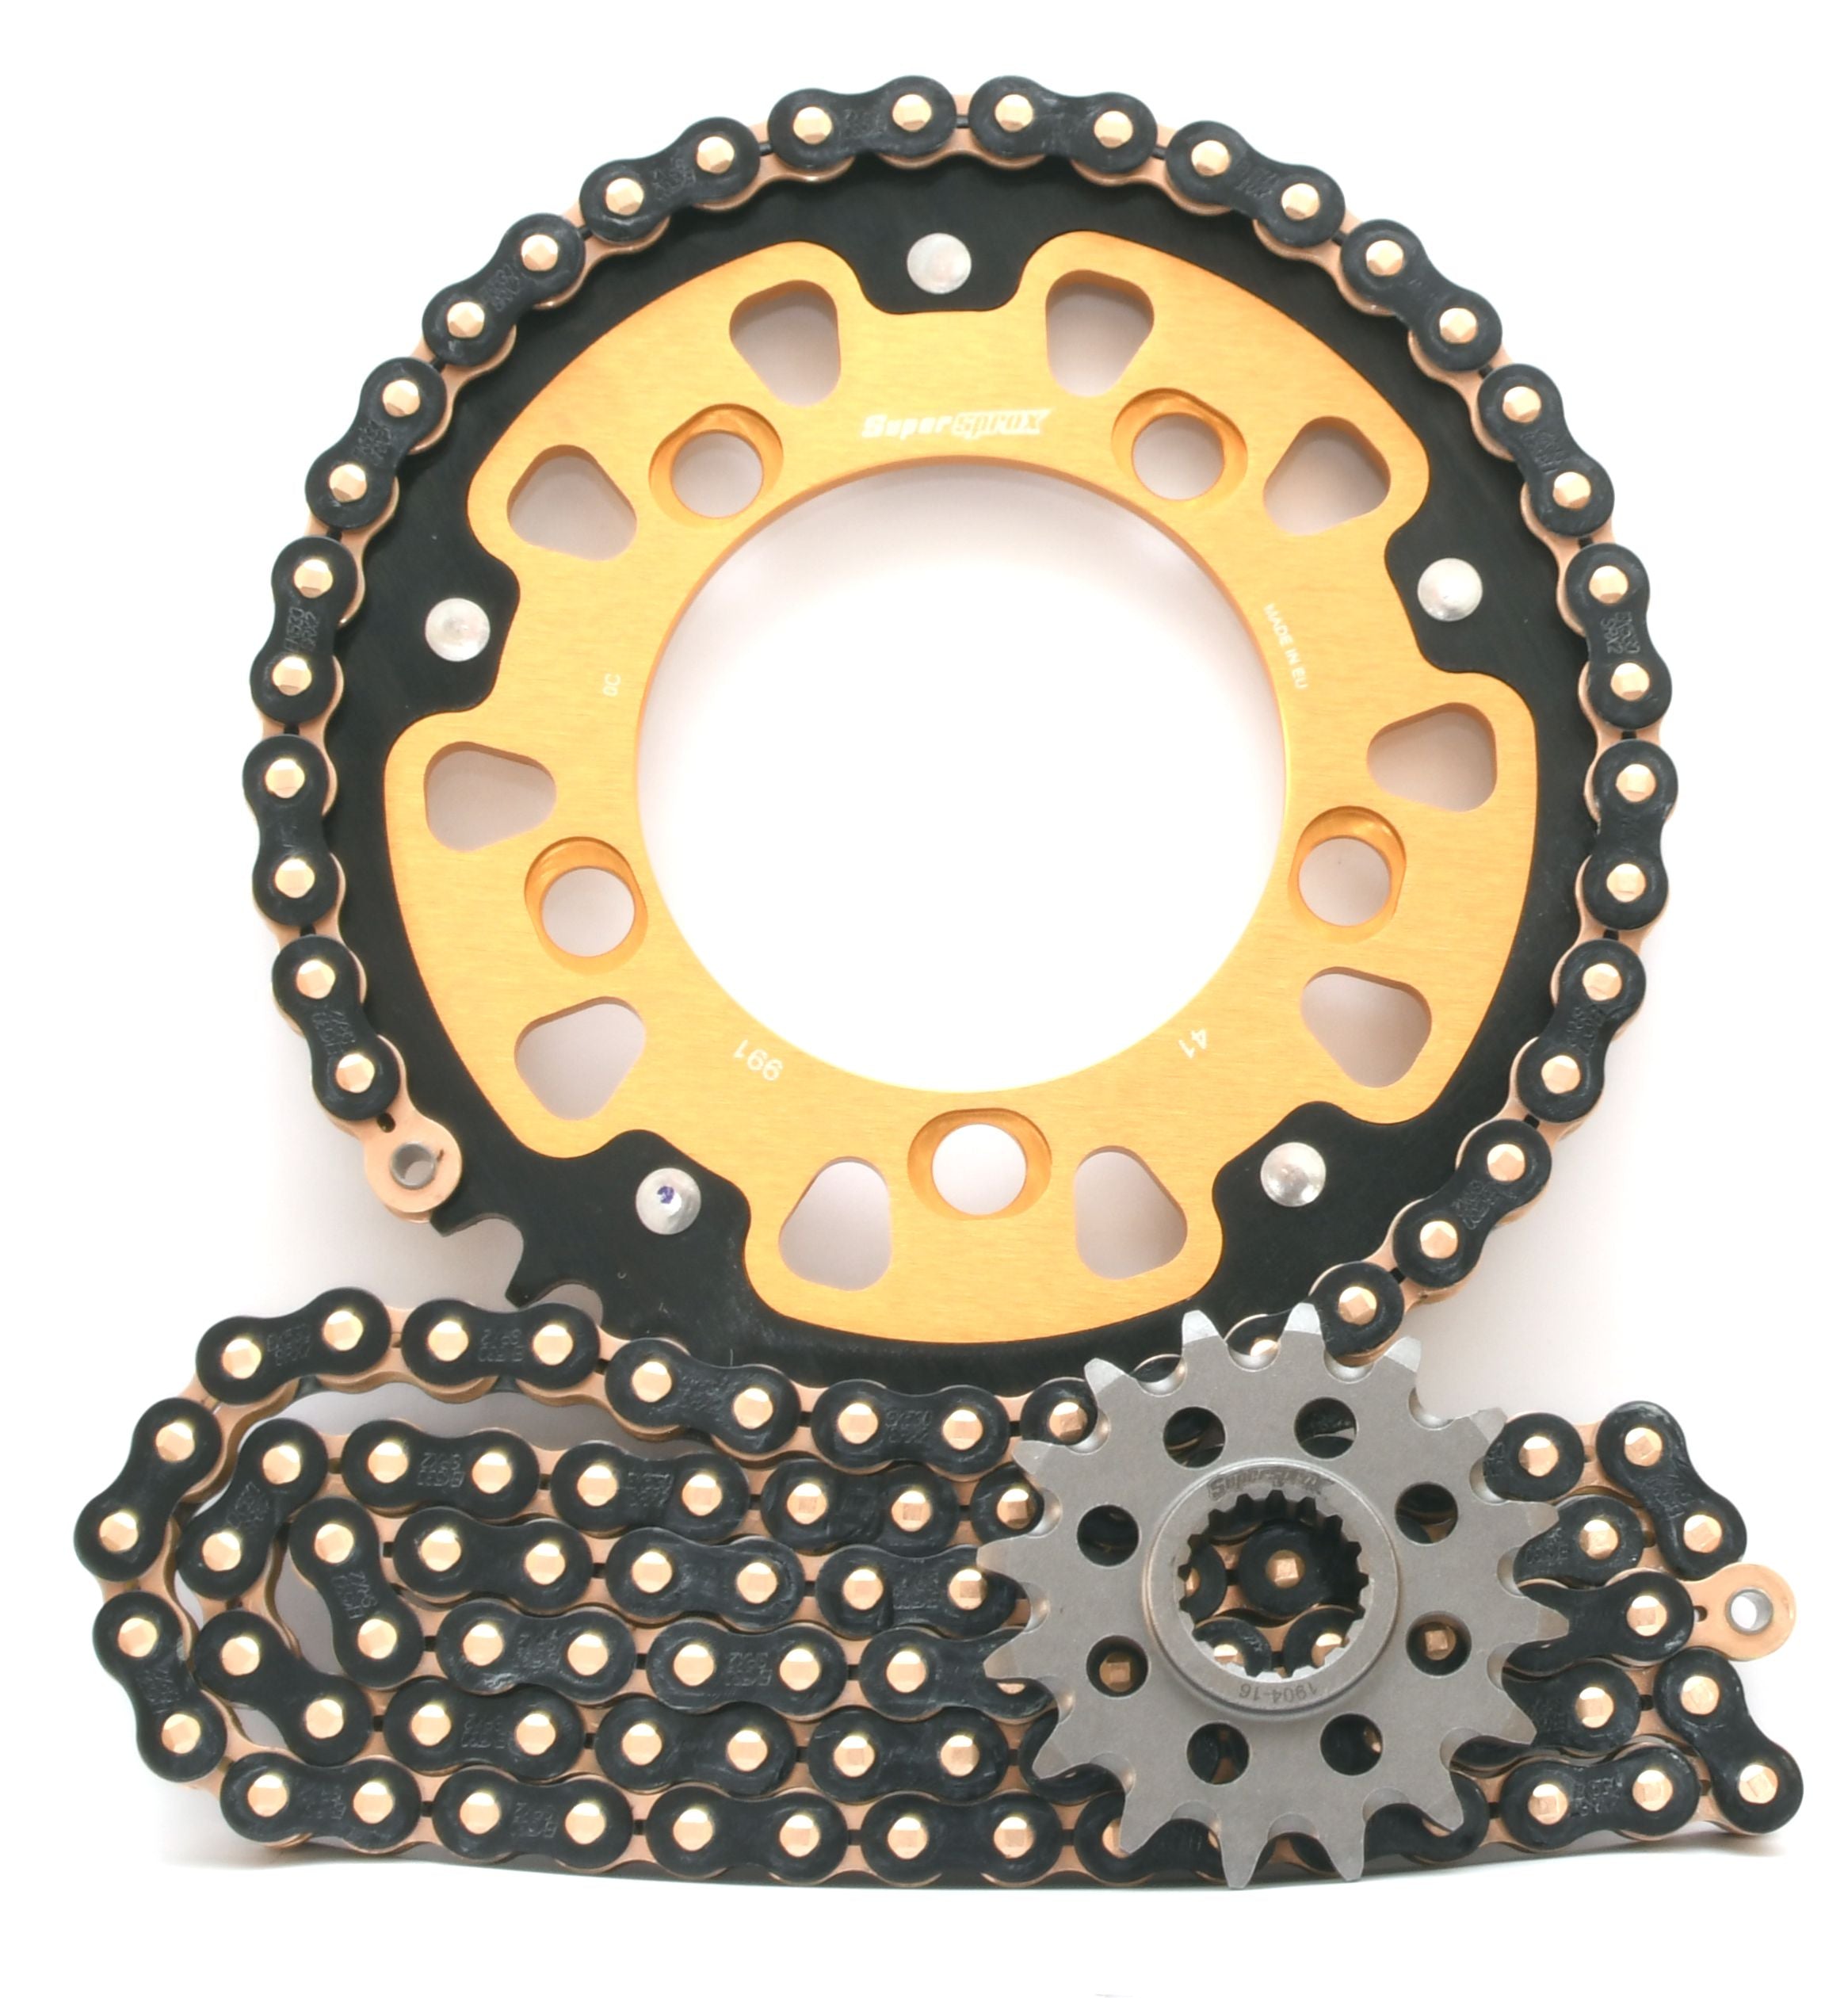 Supersprox Chain & Sprocket Kit for KTM 1190 RC8 R 09-15 - Standard Gearing